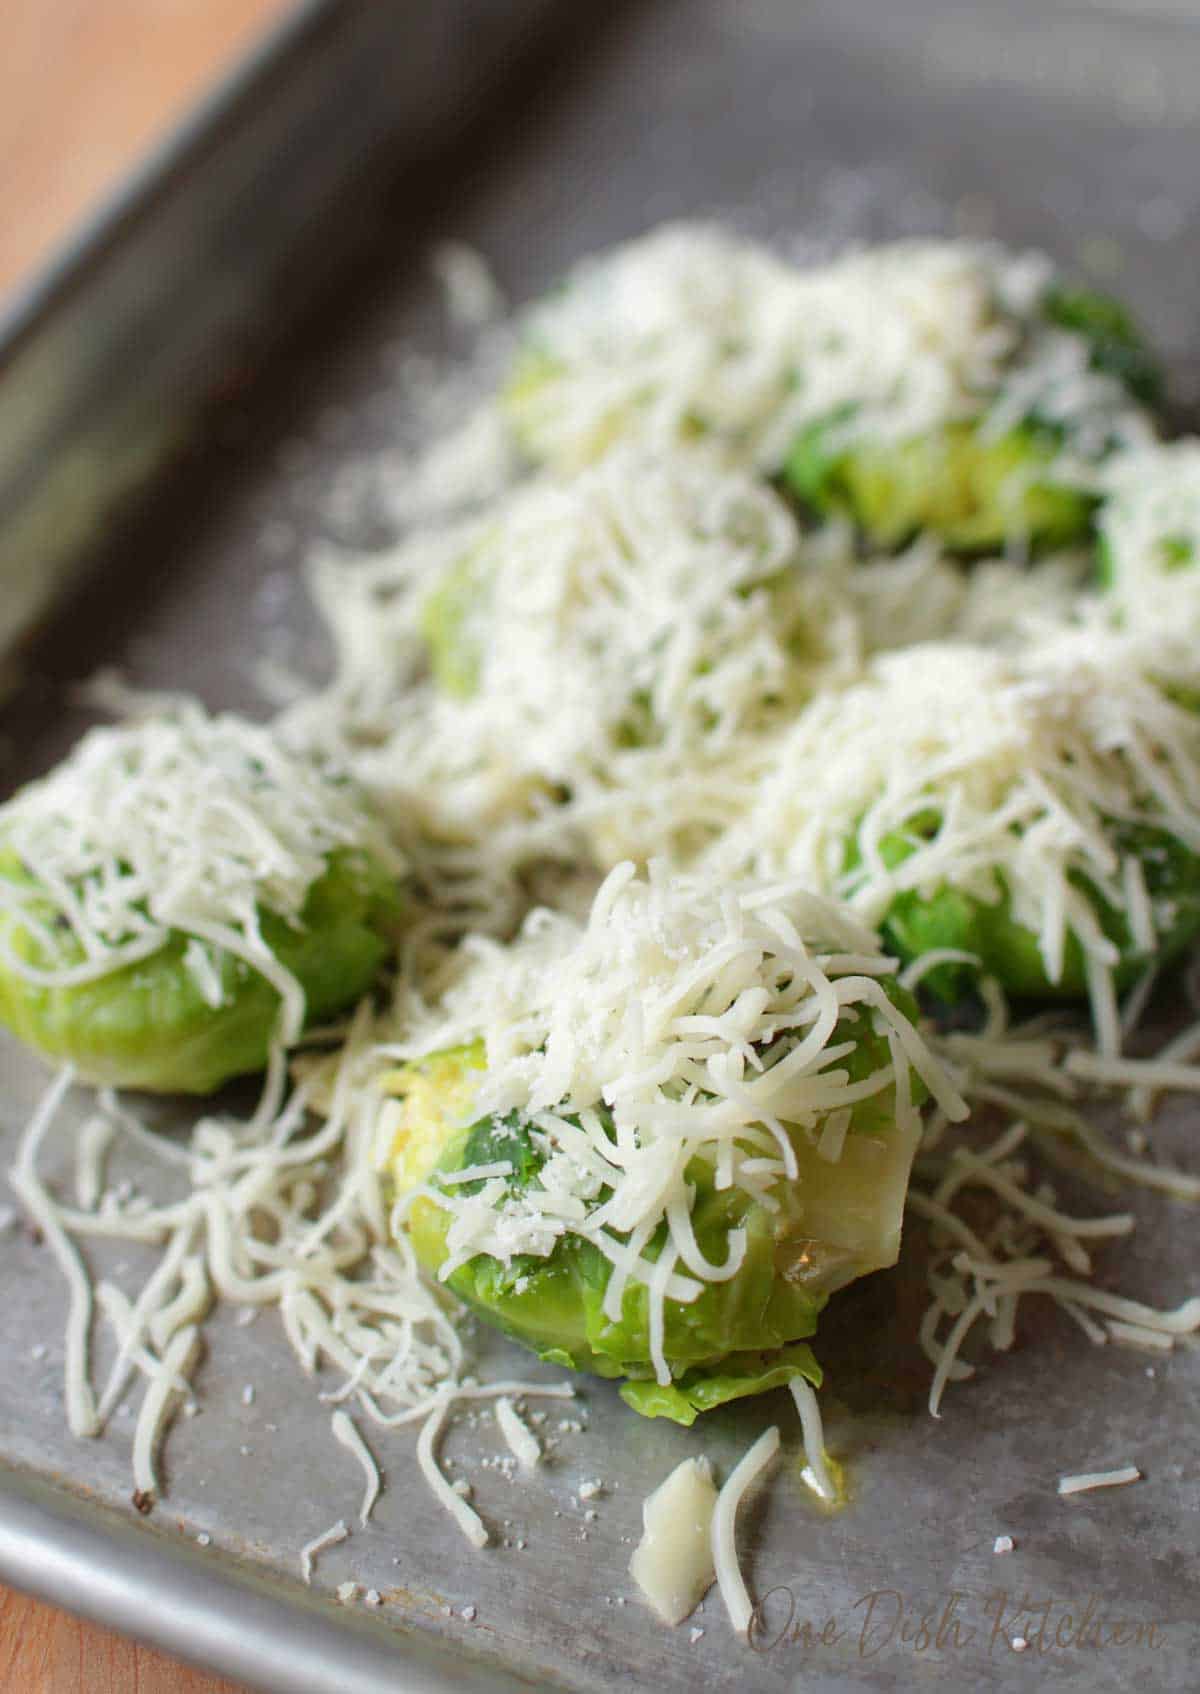 Shredded cheese on top of brussels sprouts on a baking sheet before roasting.